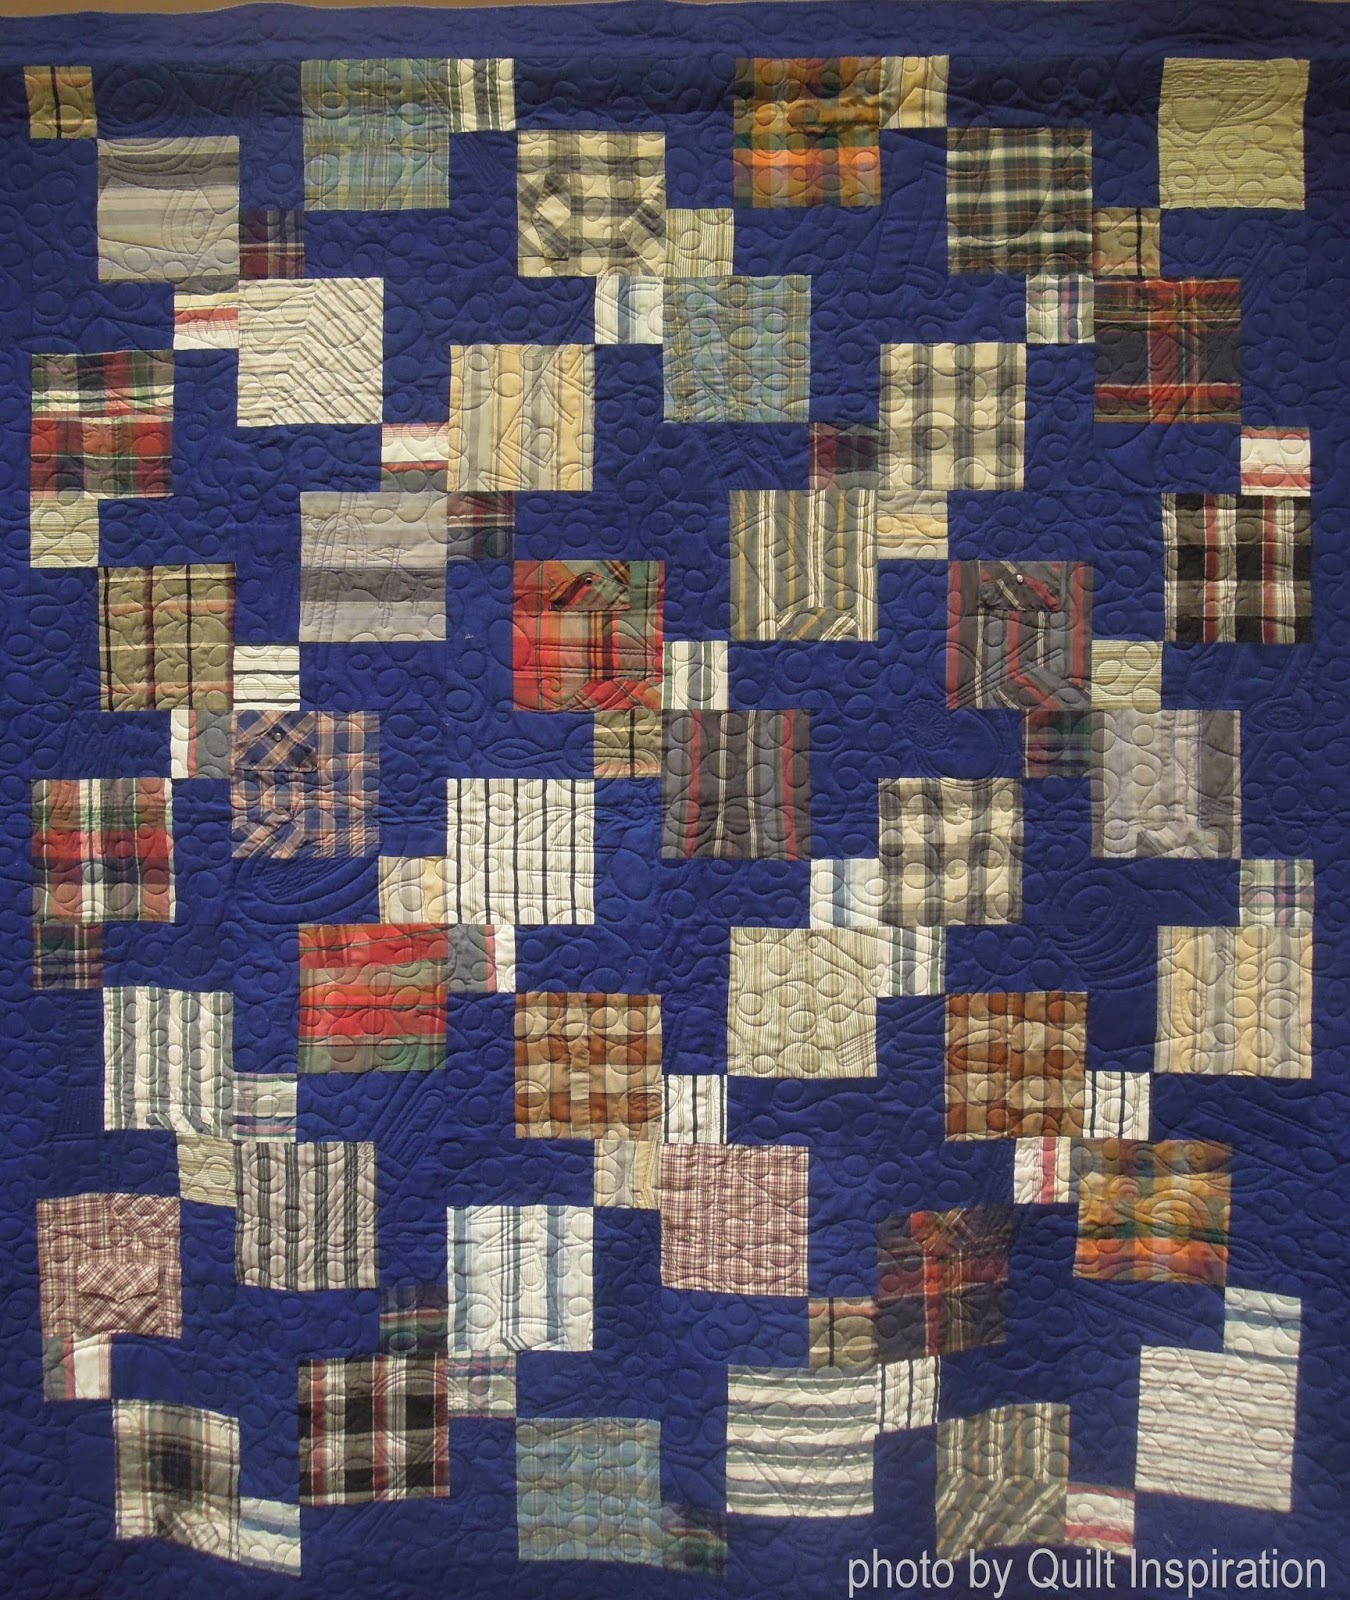 Quilt Inspiration: Free pattern day ! Father's Day quilts